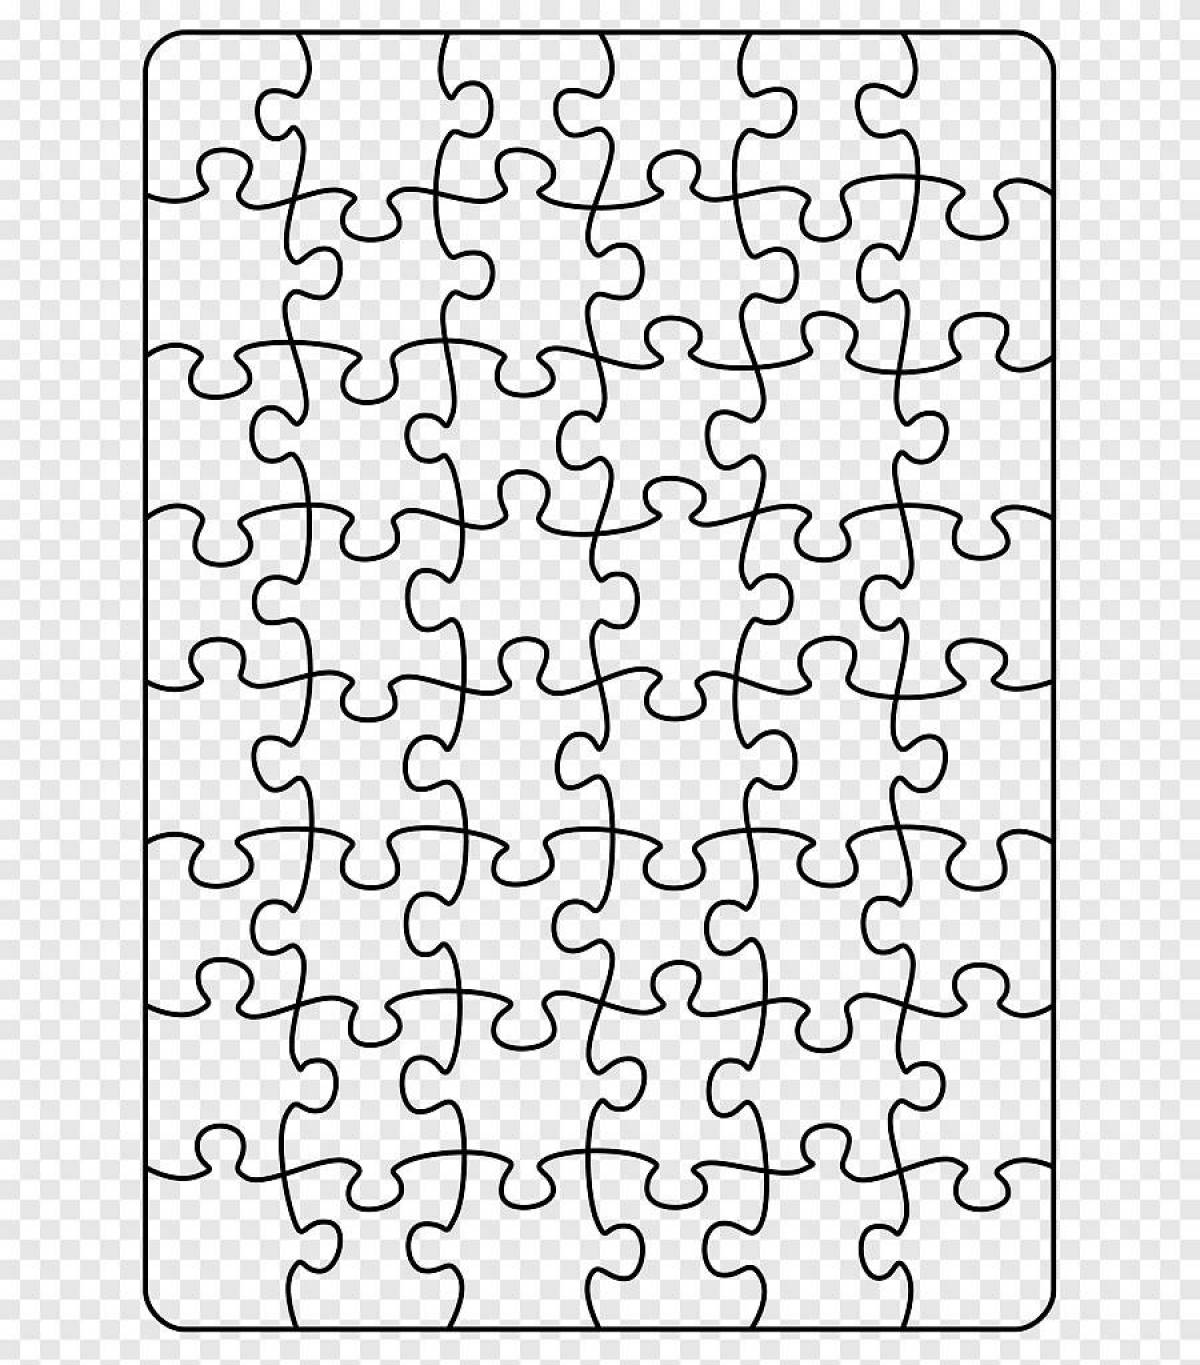 Vibrant puzzle coloring page